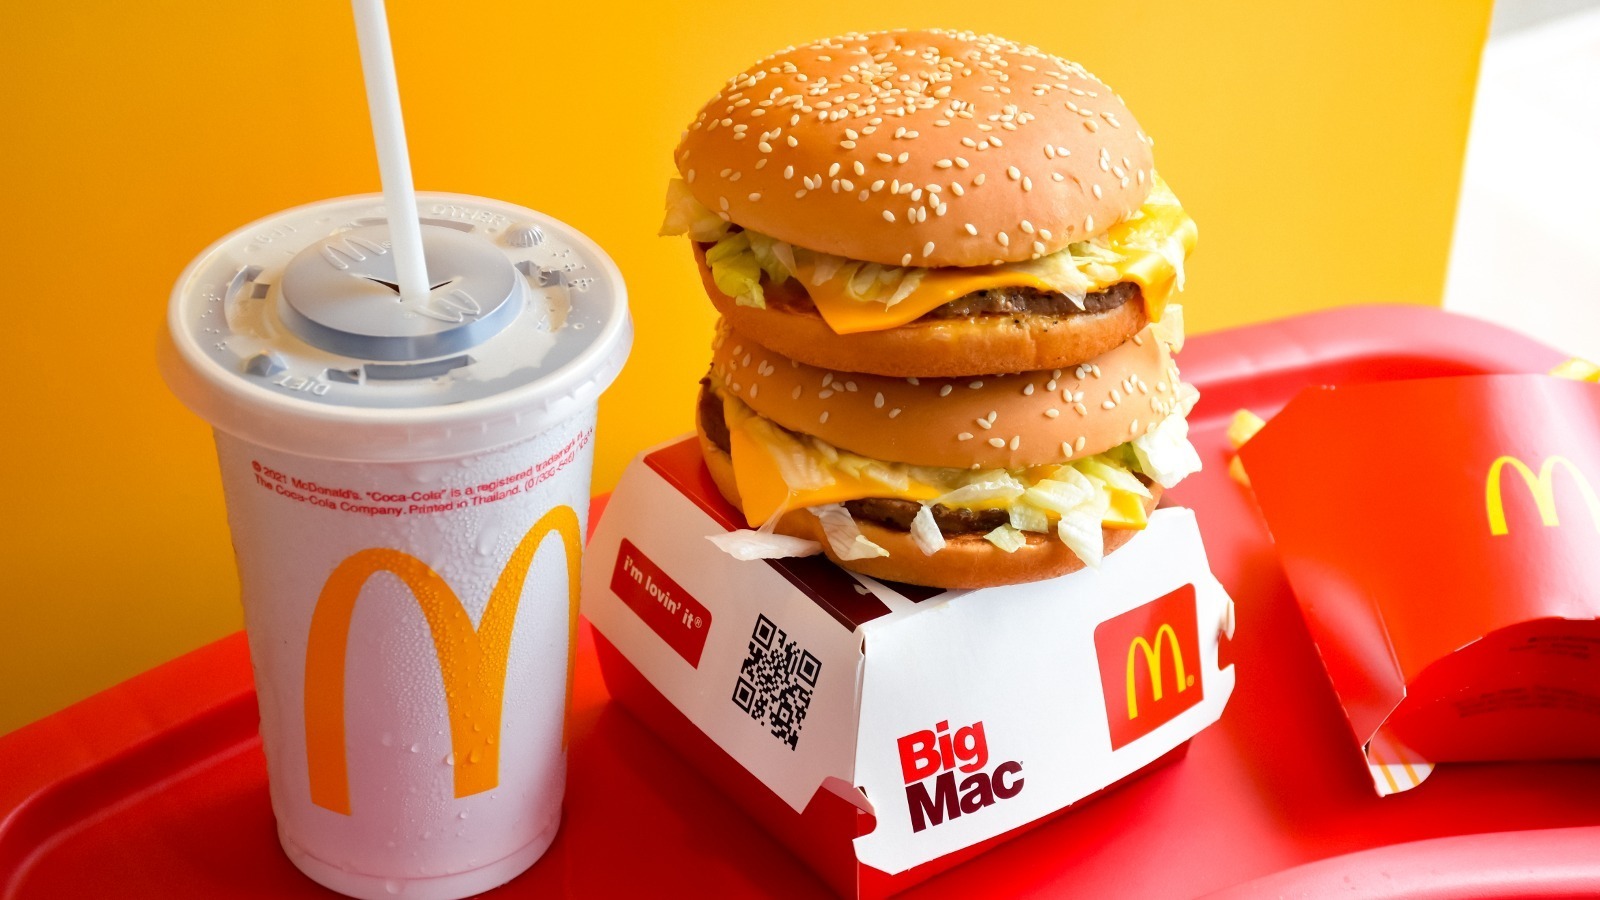 Famous Fast Food Joint McDonald’s Has Decided To Close Its CosMc’s Small-Format Restaurants